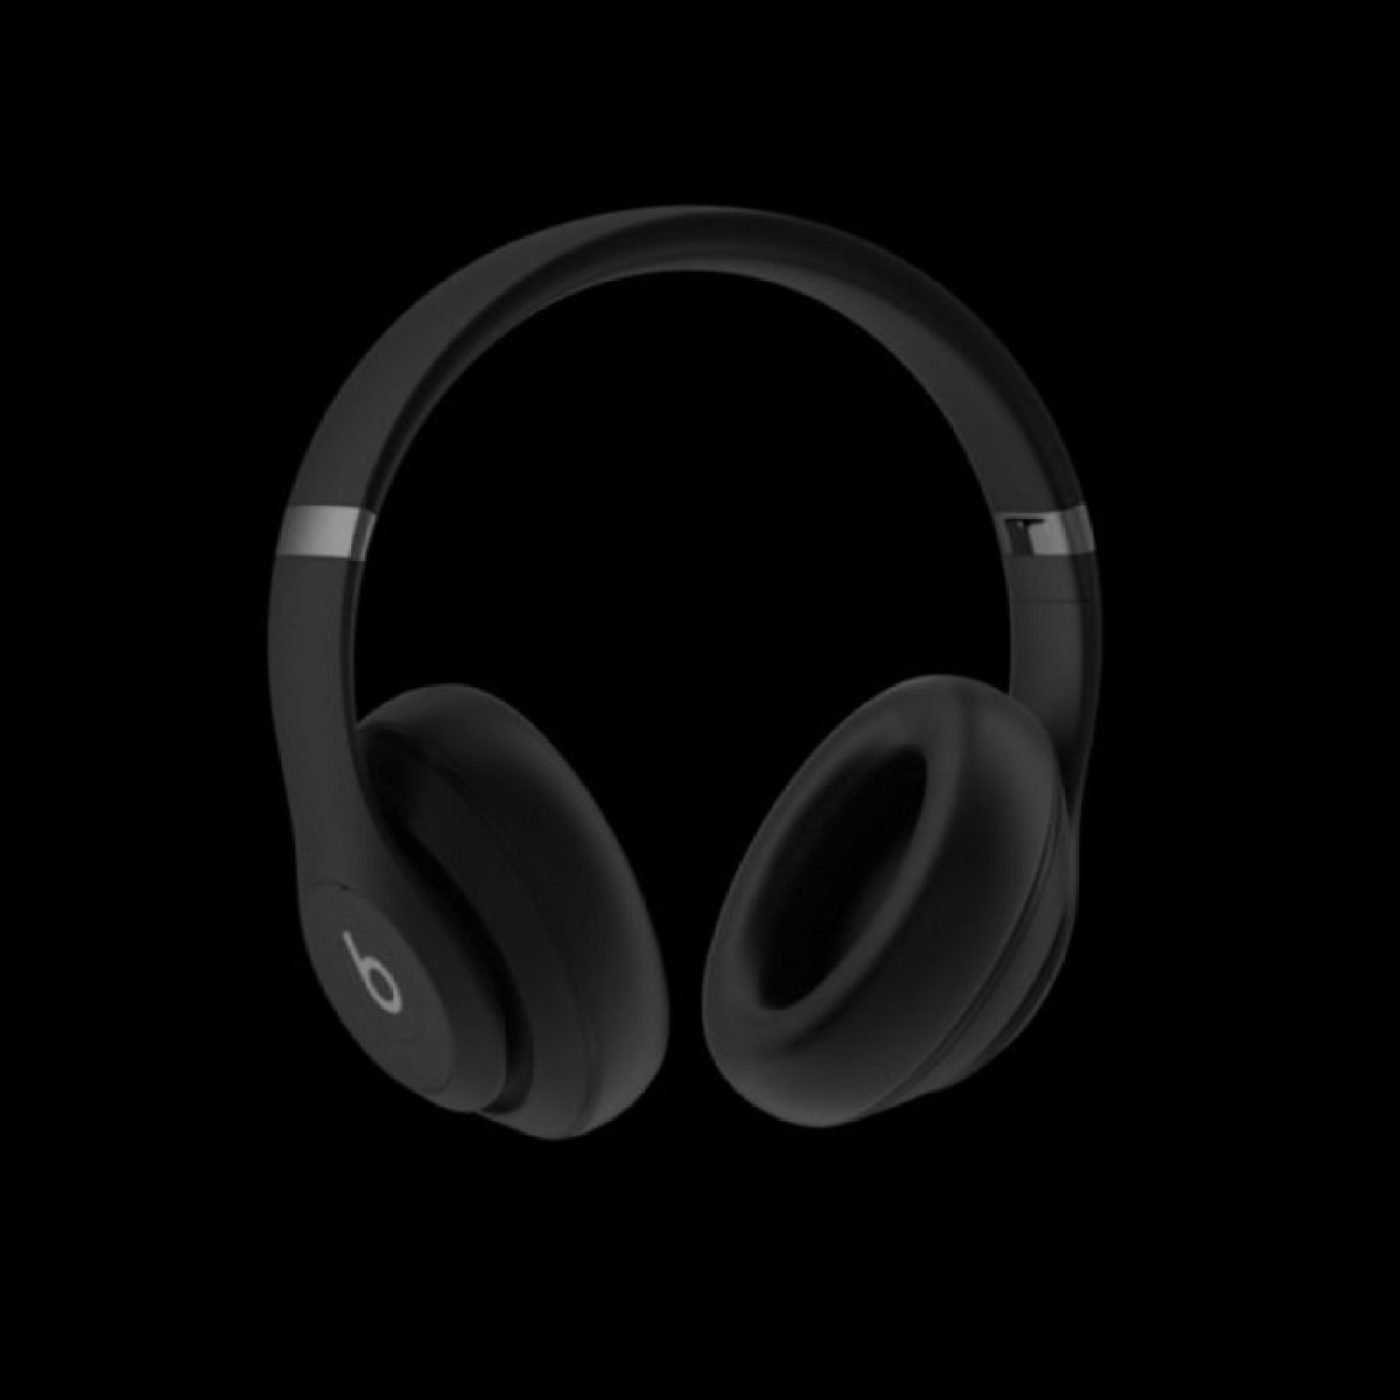 Beats Studio Pro are a needed over-the-ear headphone from Apple